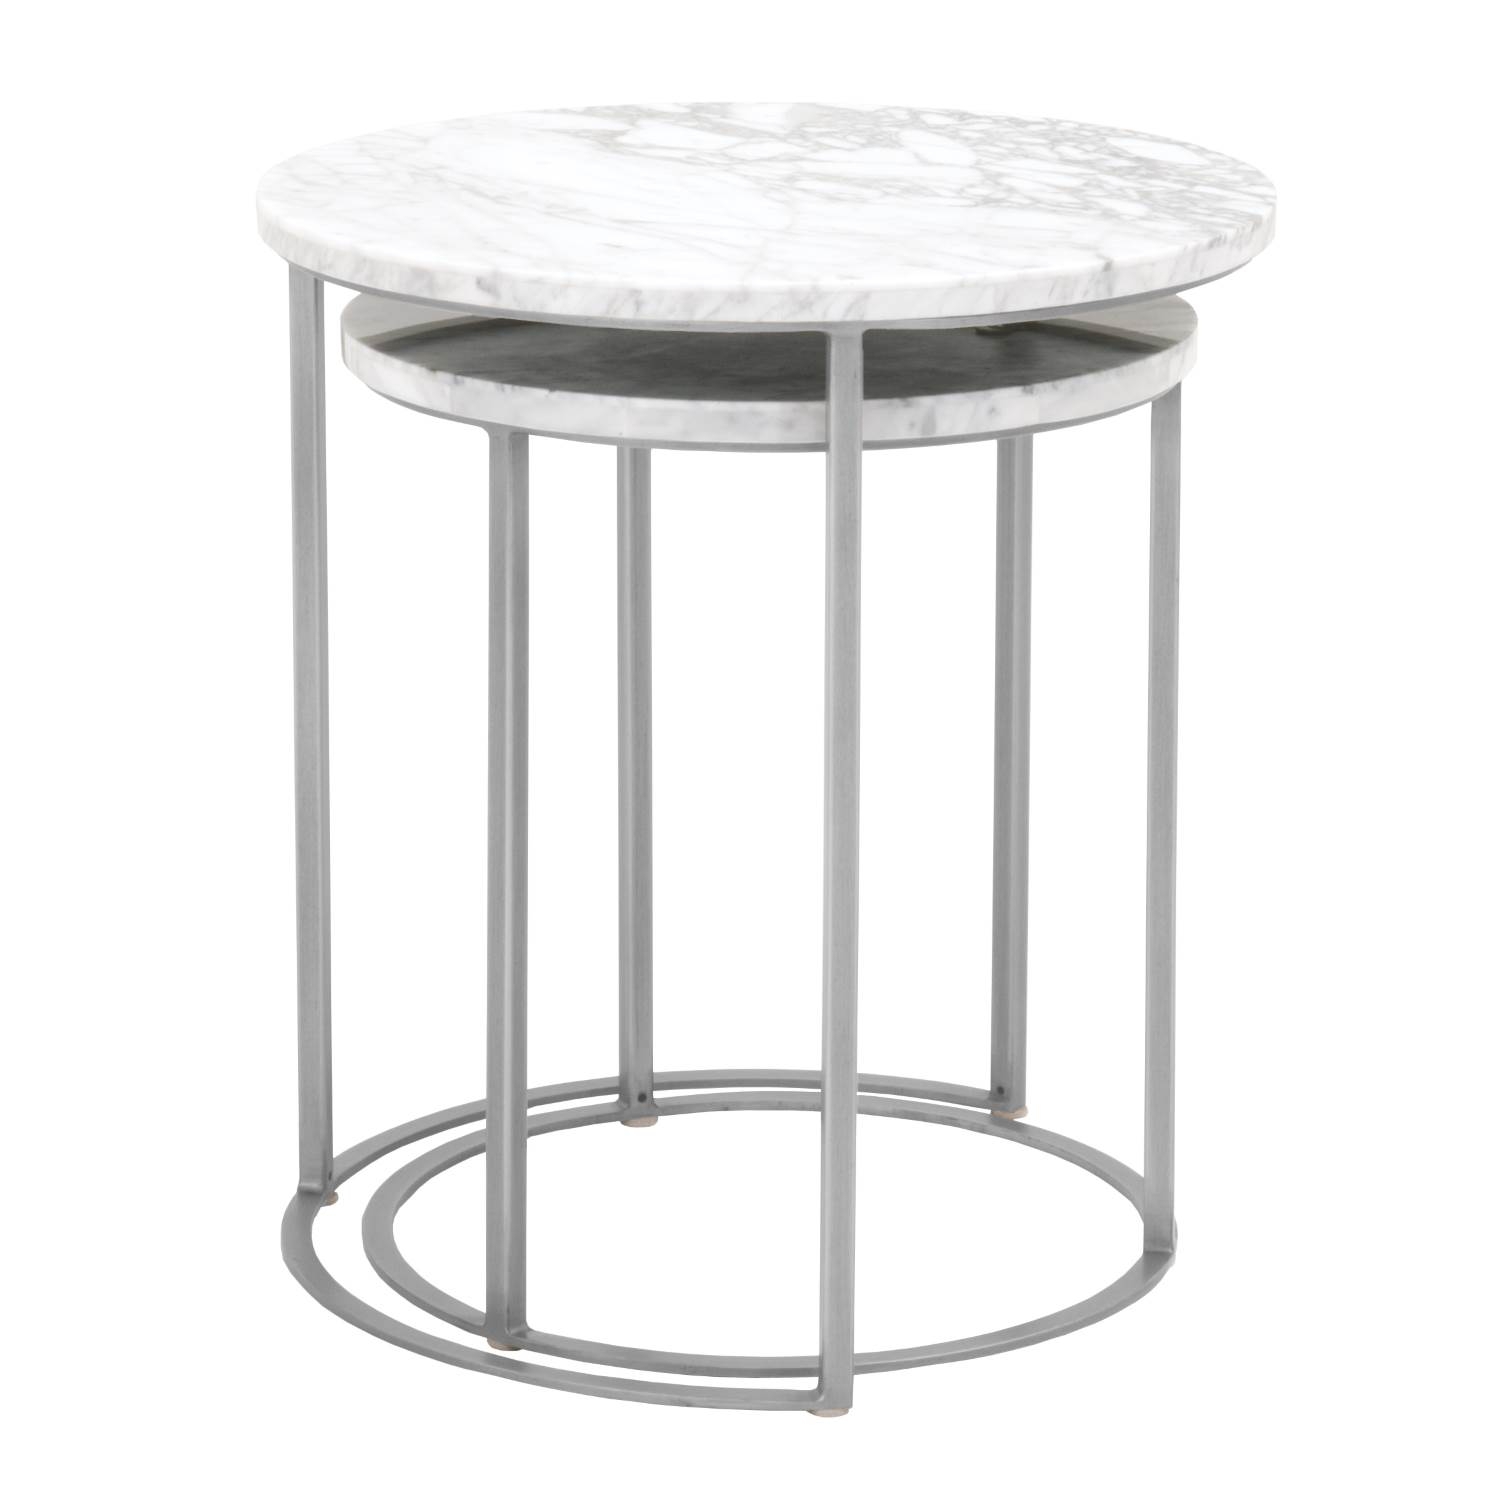 Carrera Round Nesting Accent Table - Image 1